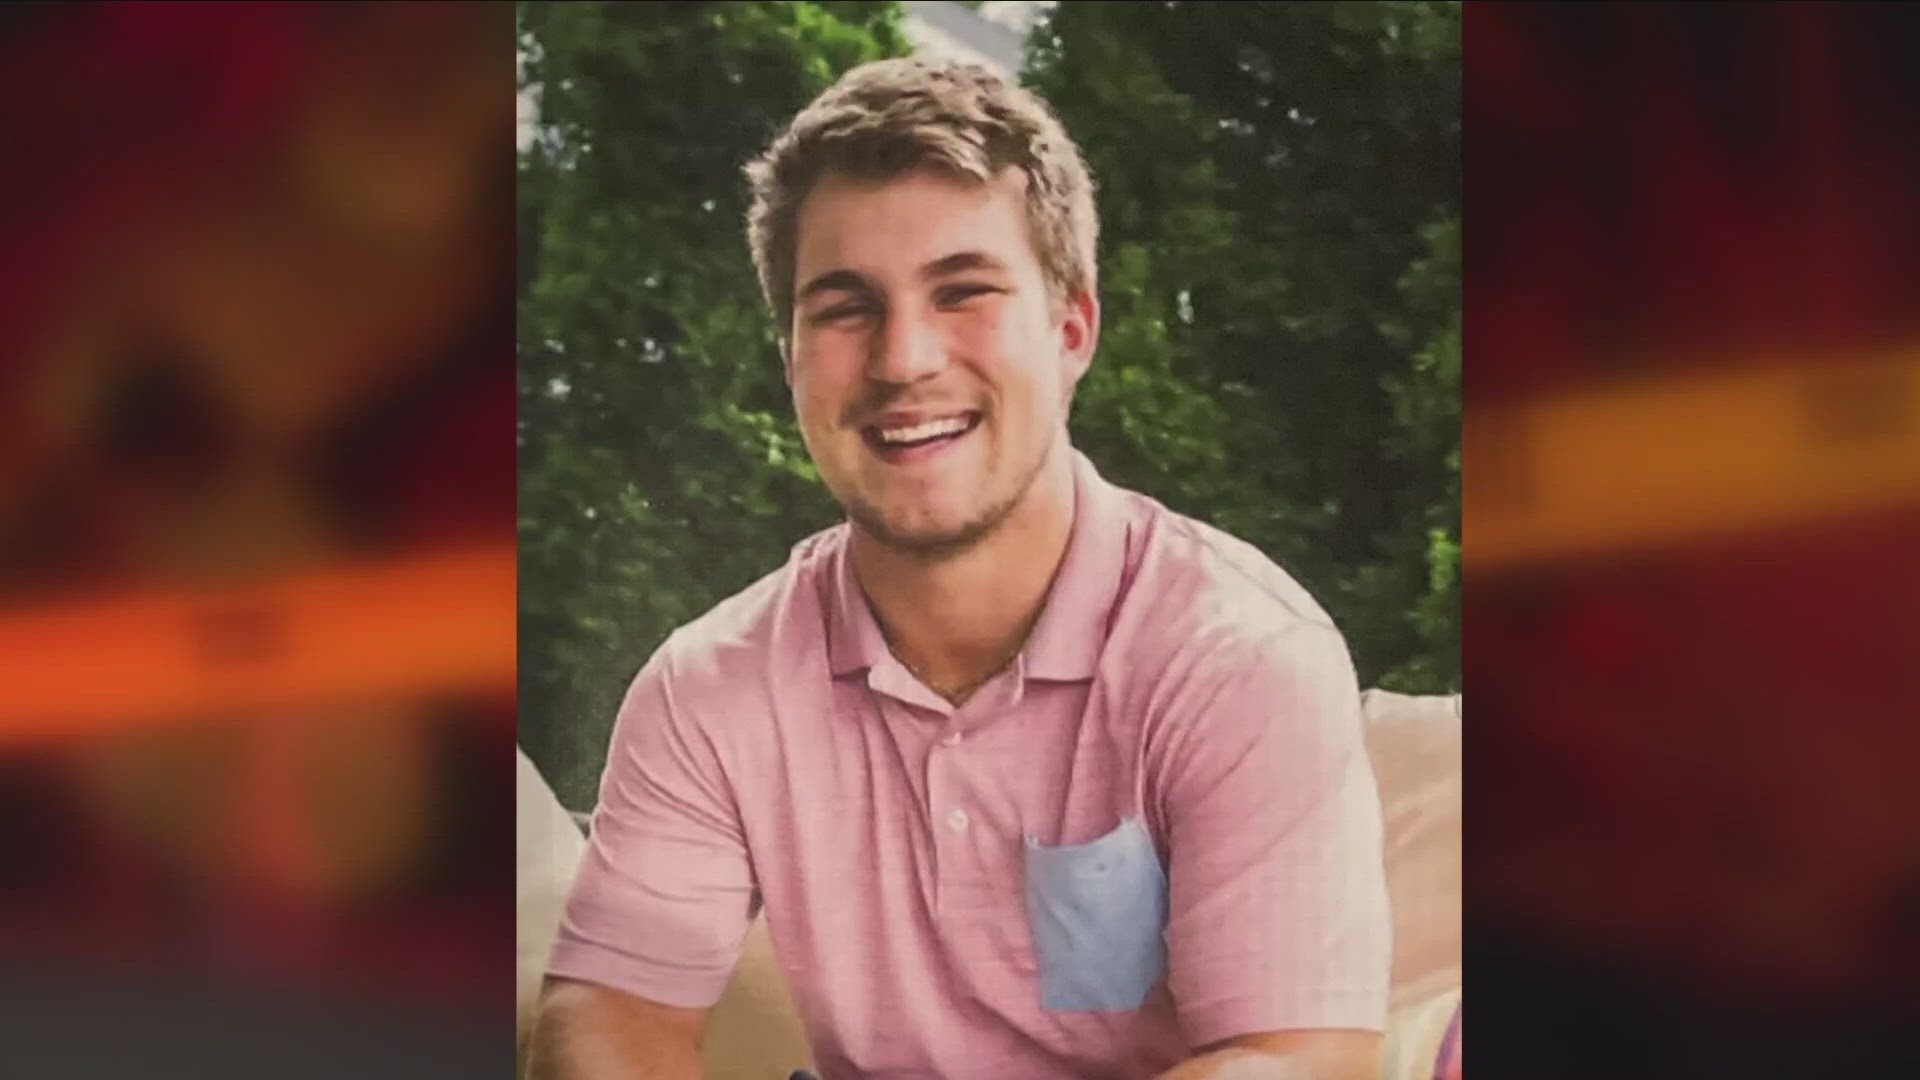 THE ORCHARD PARK NATIVE WAS a freshman at the university of tampa. HE WAS KILLED LAST SEPTEMBER WHILE ENTERING A CAR HE MISTAKENLY THOUGHT WAS HIS UBER RIDE